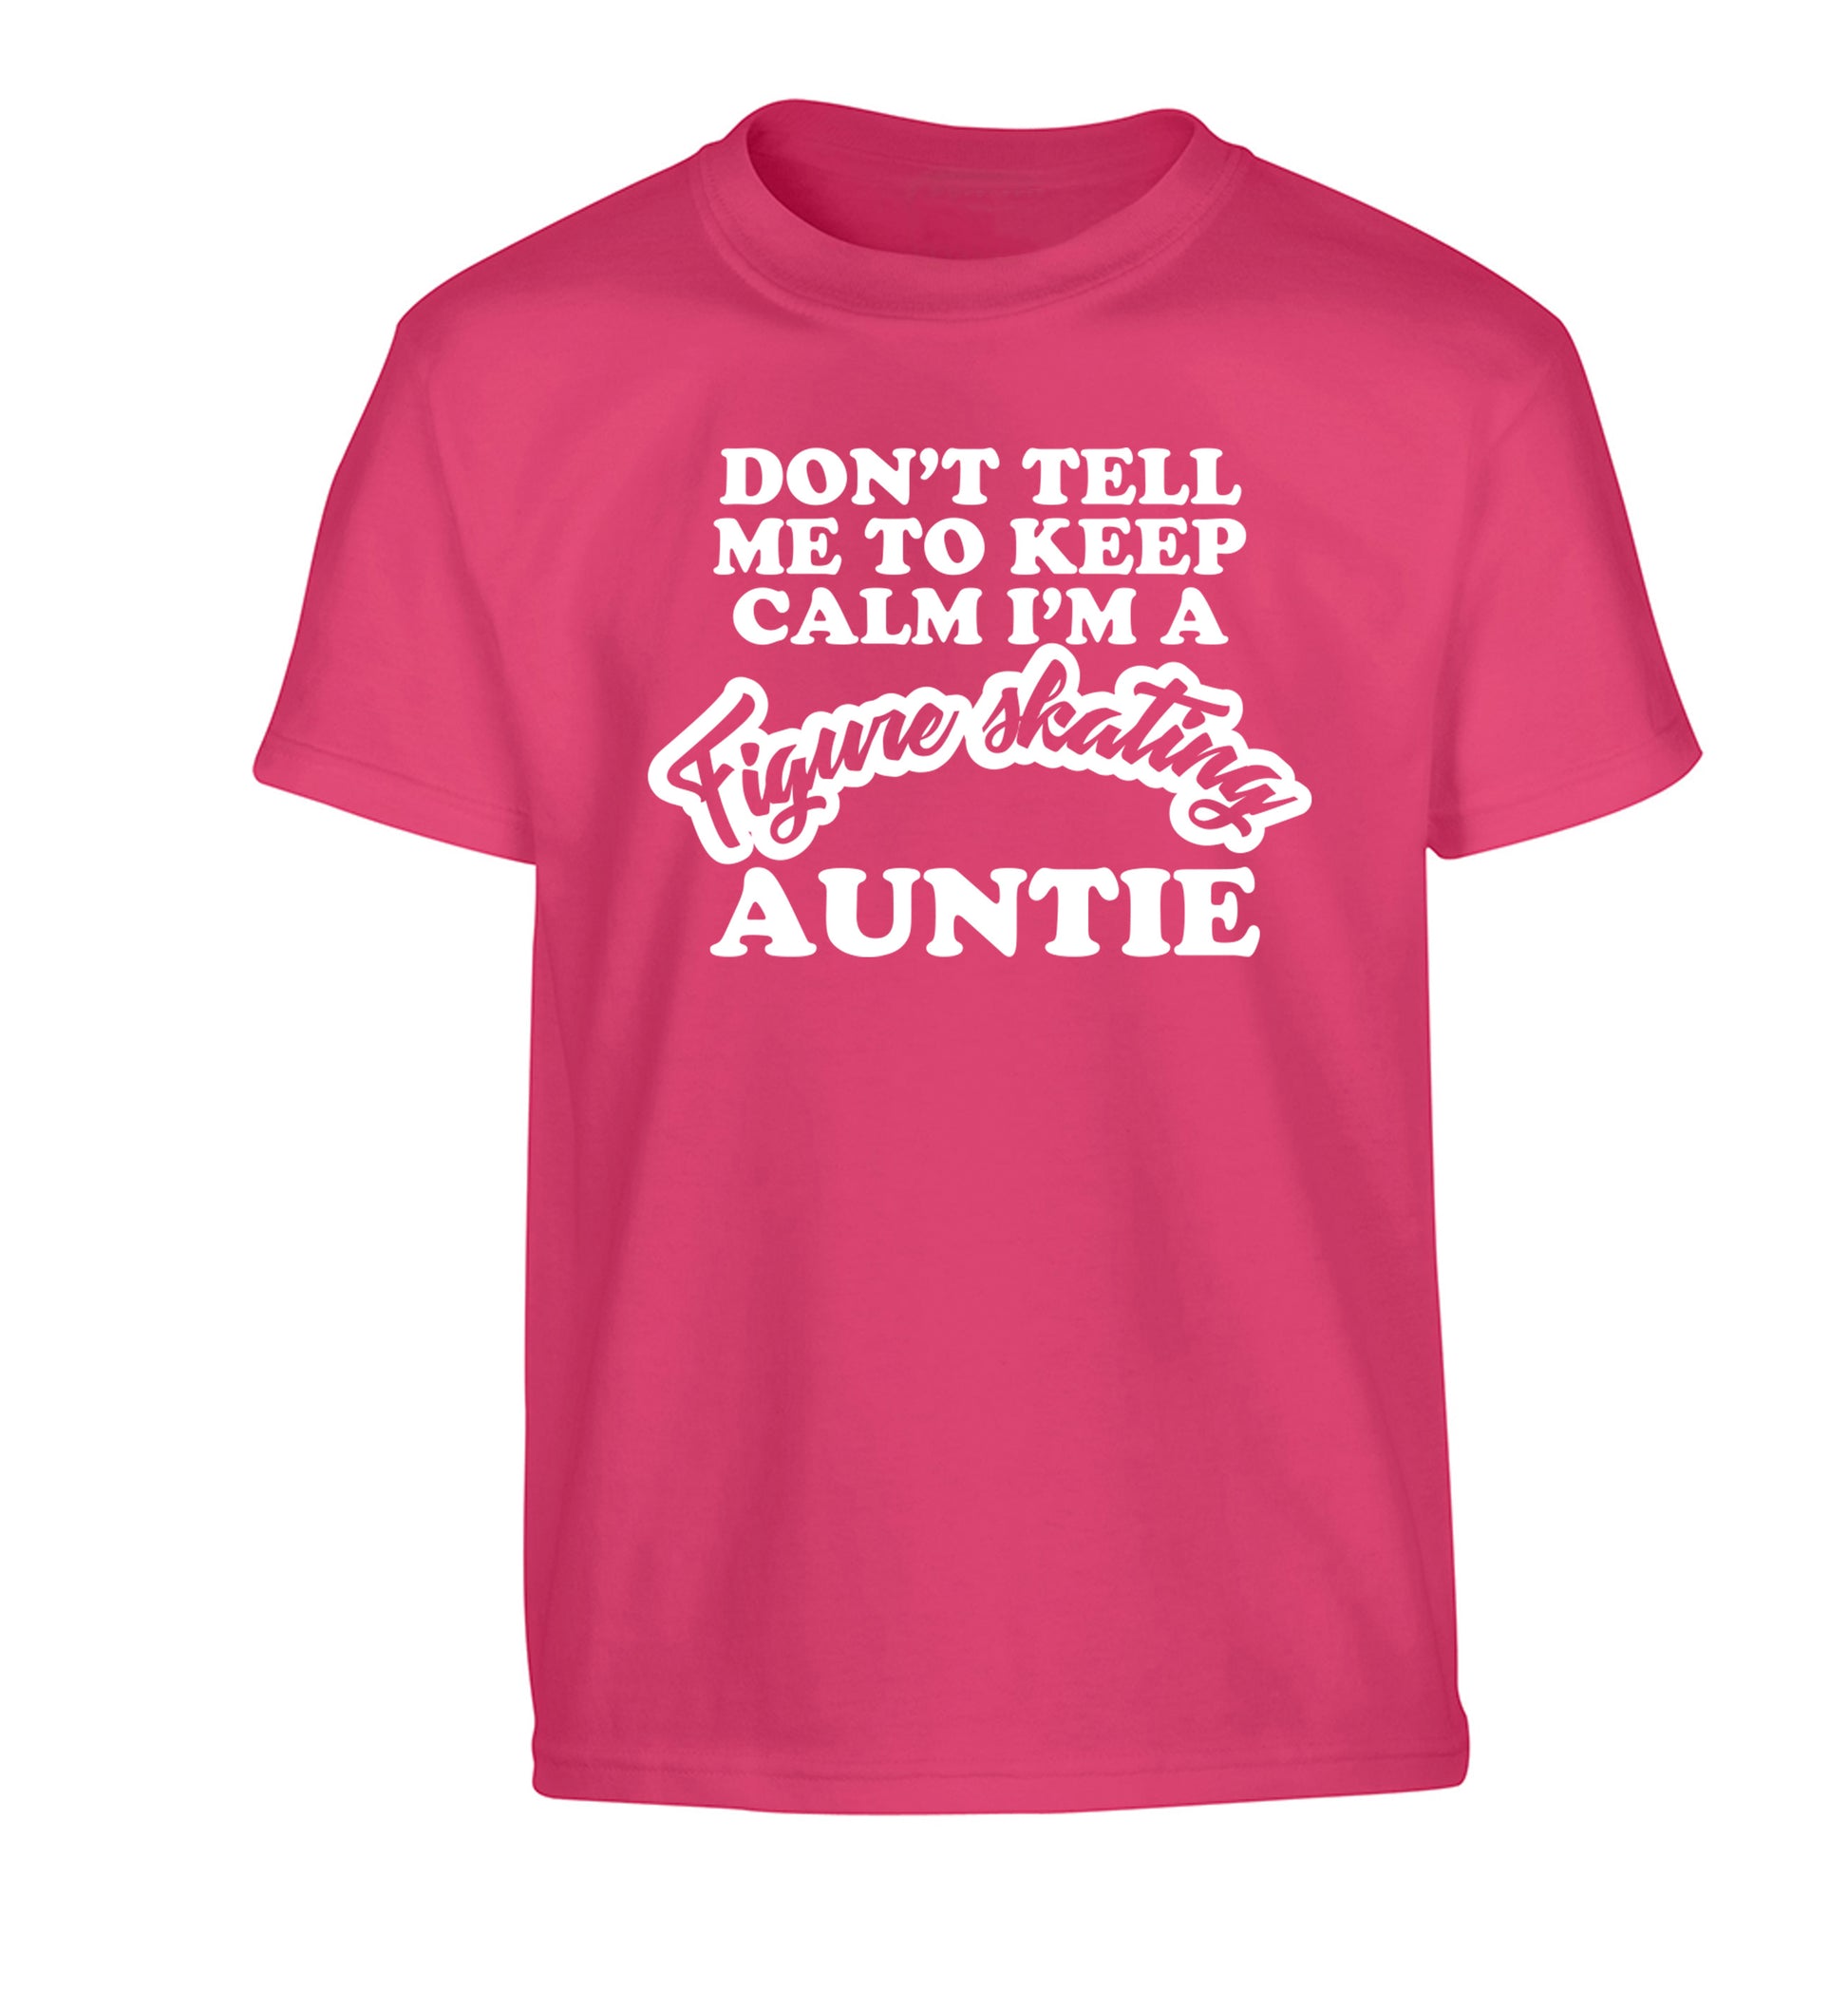 Don't tell me to keep calm I'm a figure skating auntie Children's pink Tshirt 12-14 Years